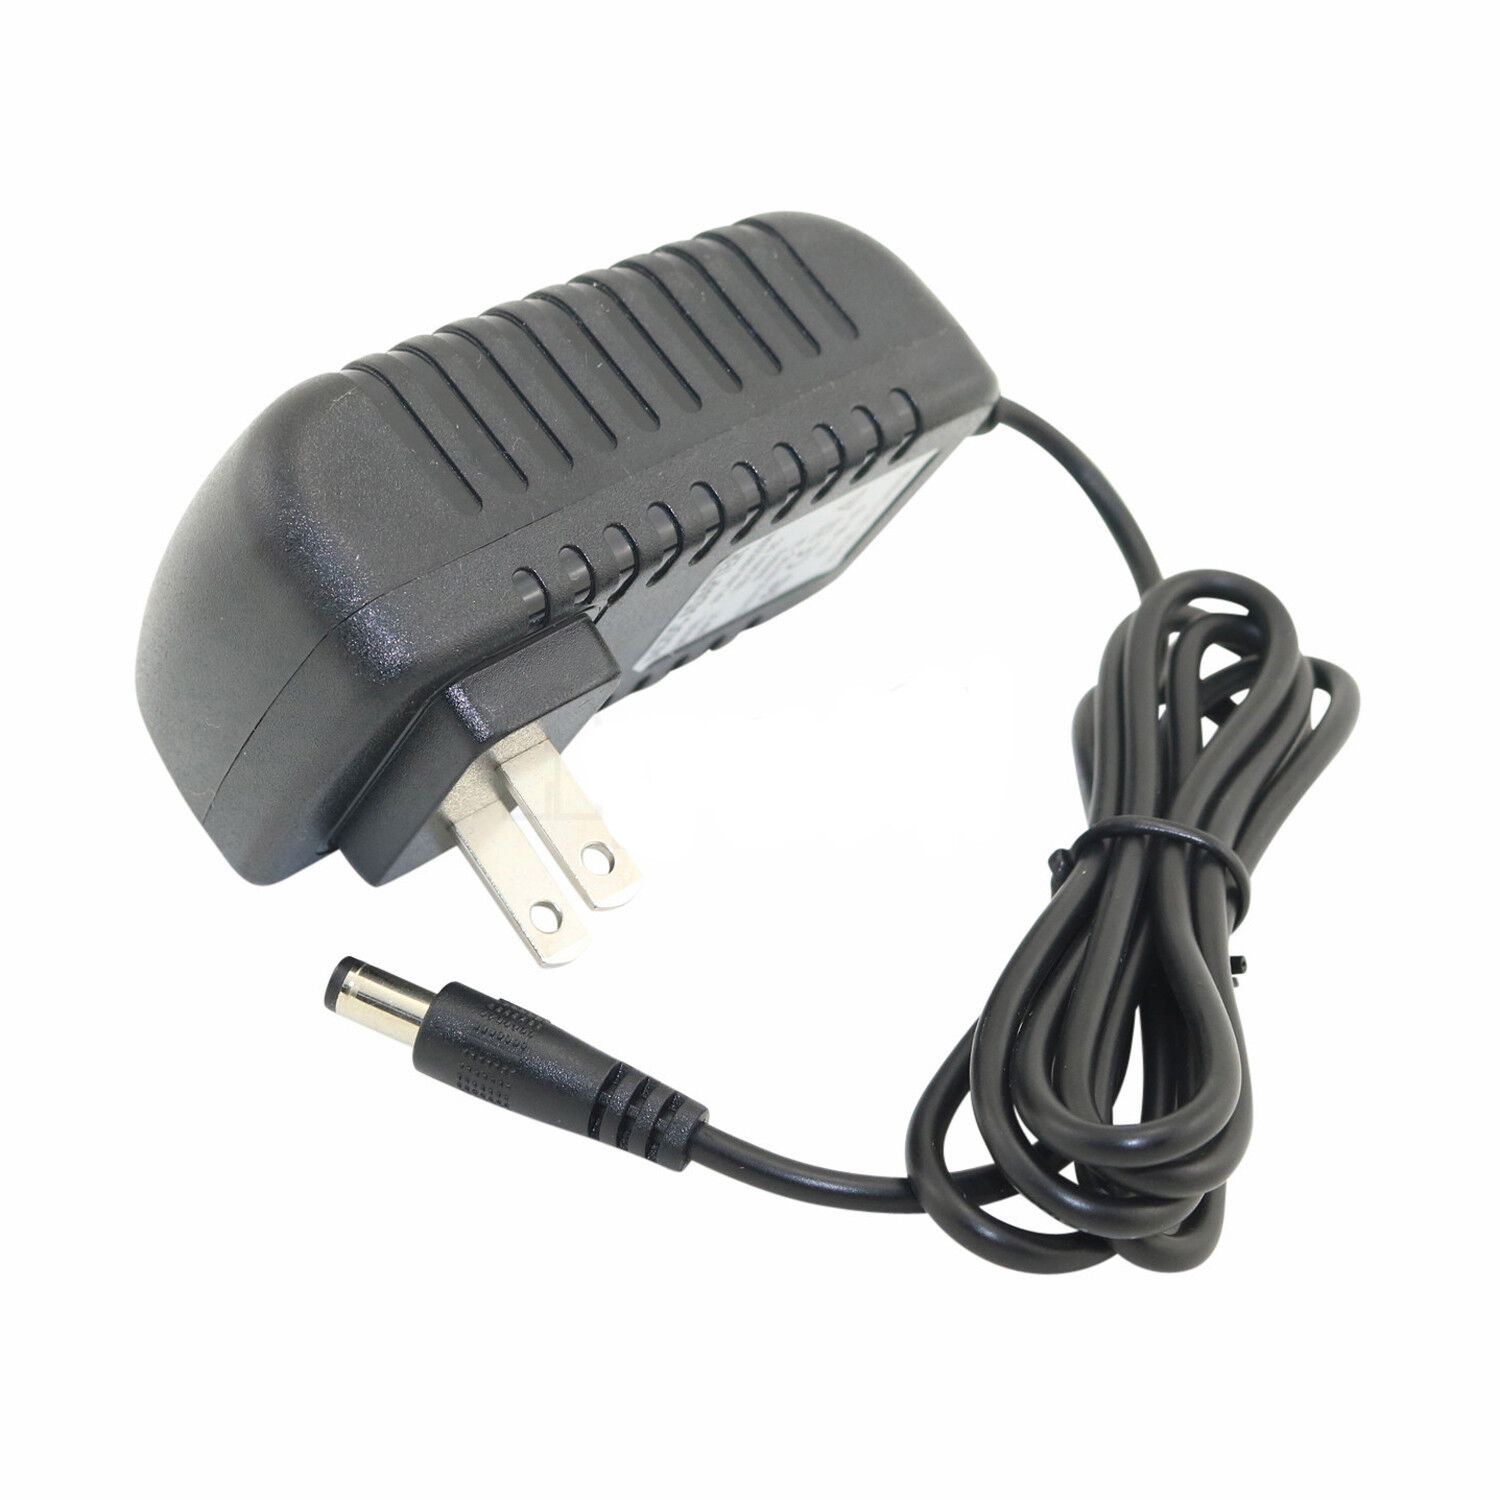 *Brand NEW*iBelieve Portable Nail Drill TP283 SUN-1260150 12.6V DC Charger AC Adapter